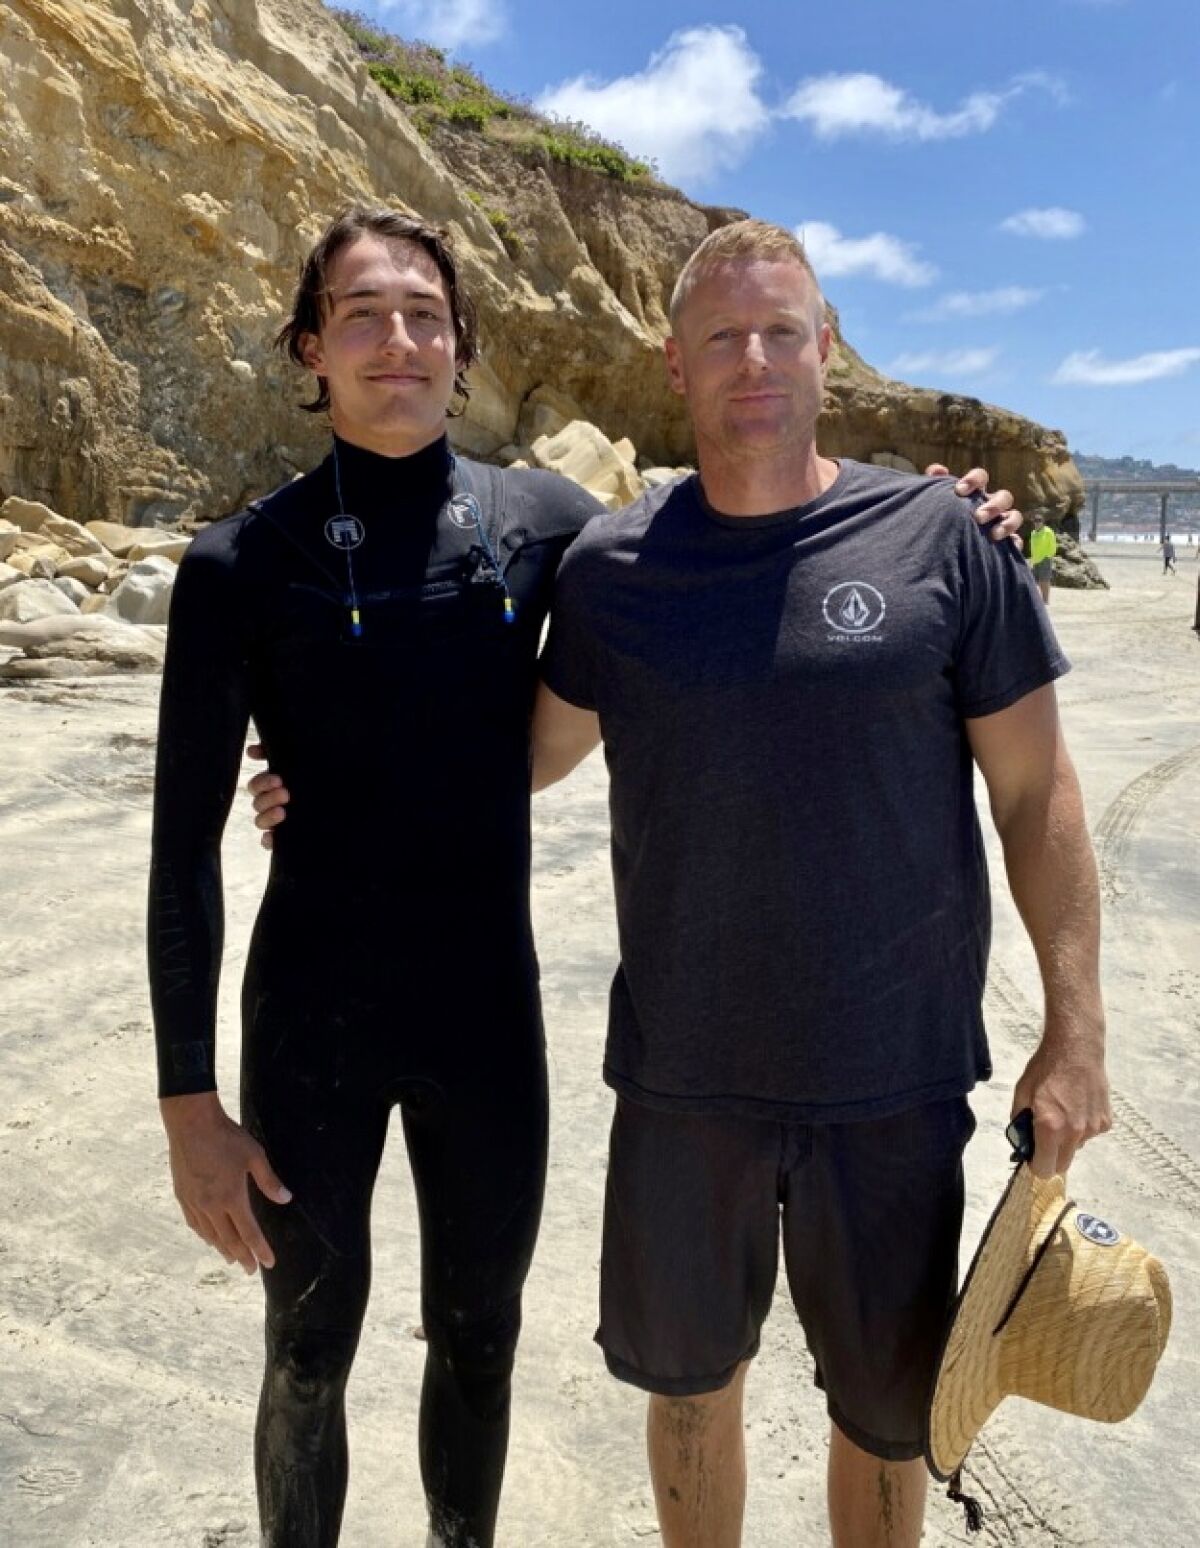 Jack Barone (left) and Neil Garrett worked together to rescue a 10-year-old girl from the surf at La Jolla Shores.